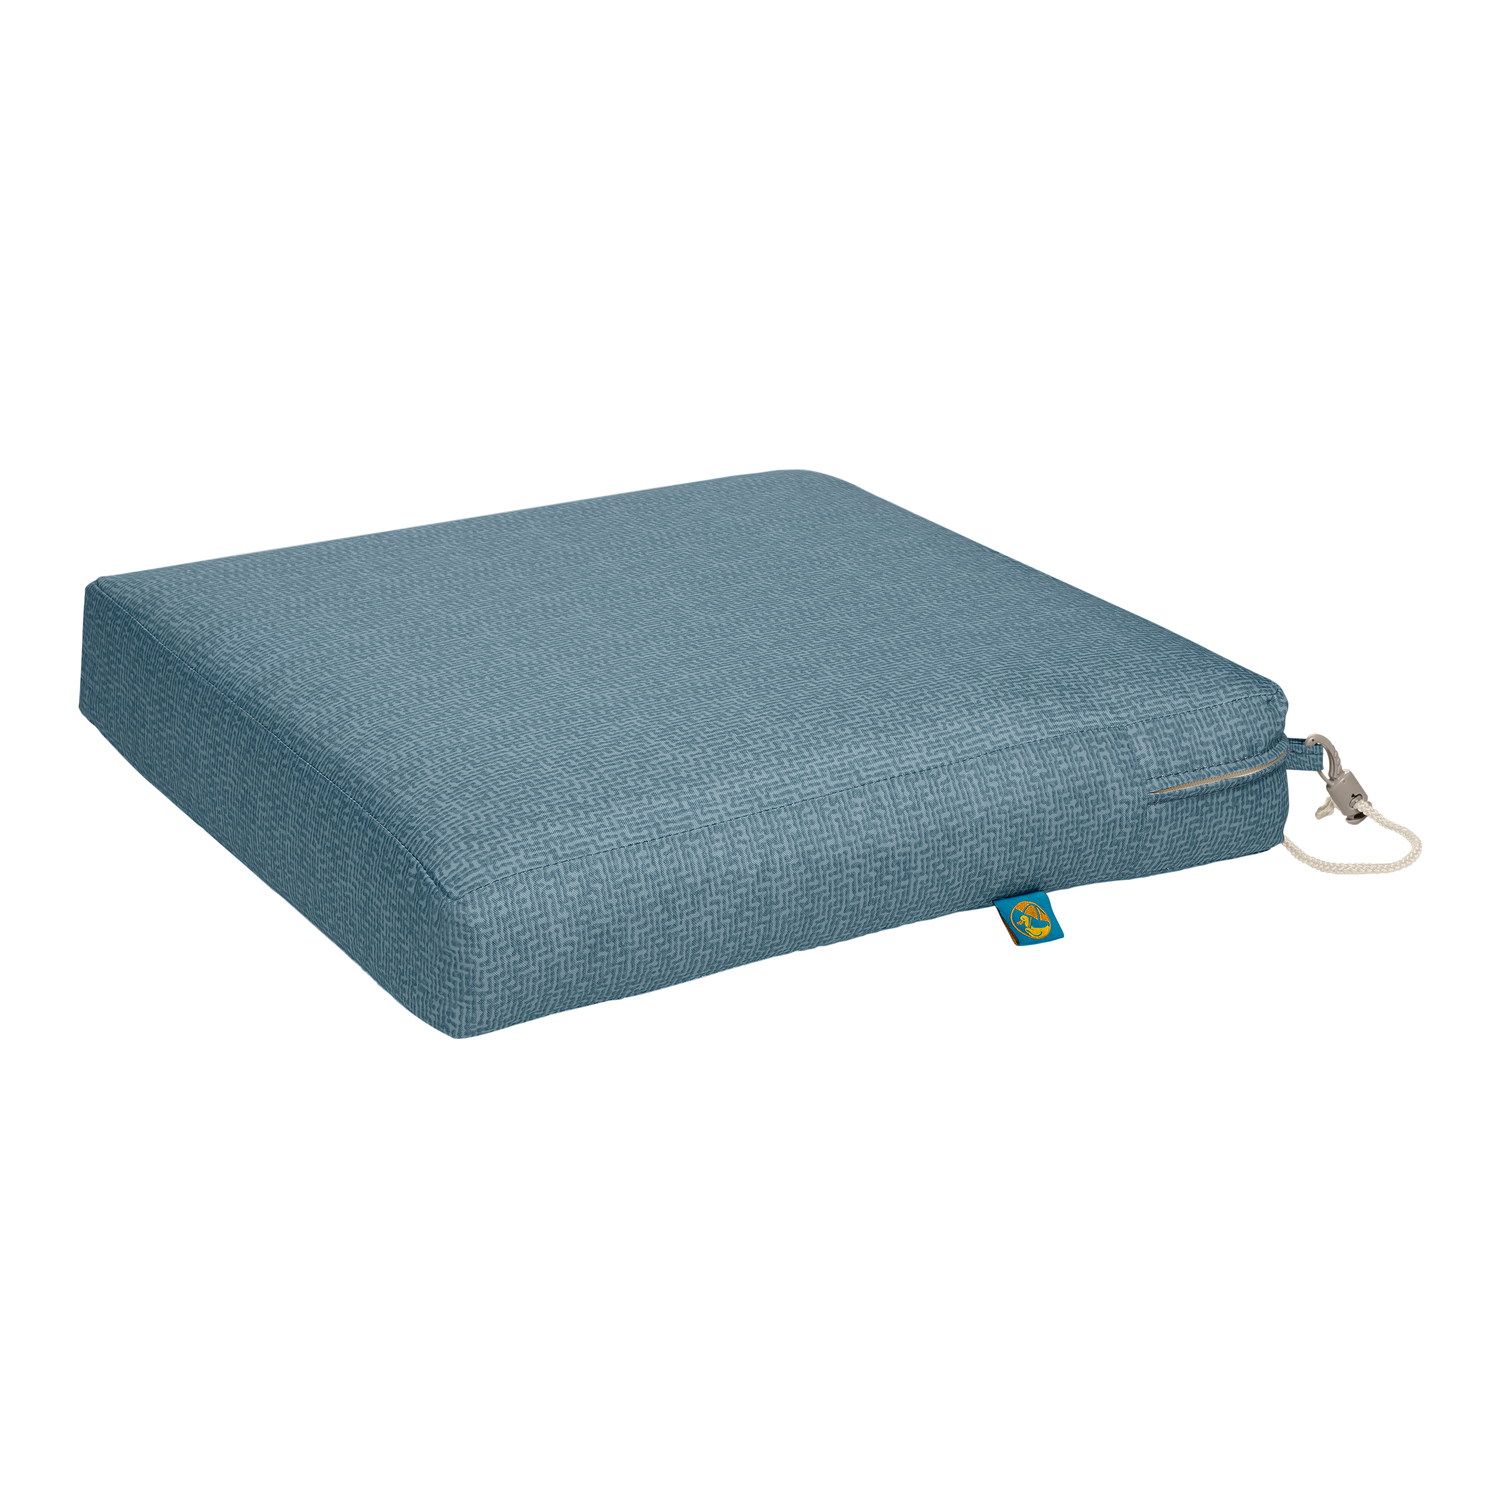 Photo 1 of Duck Covers Weekend Blueshadow Casual Polyester Seat Cushion 3 in. H X 19 in. W X 21 in. L